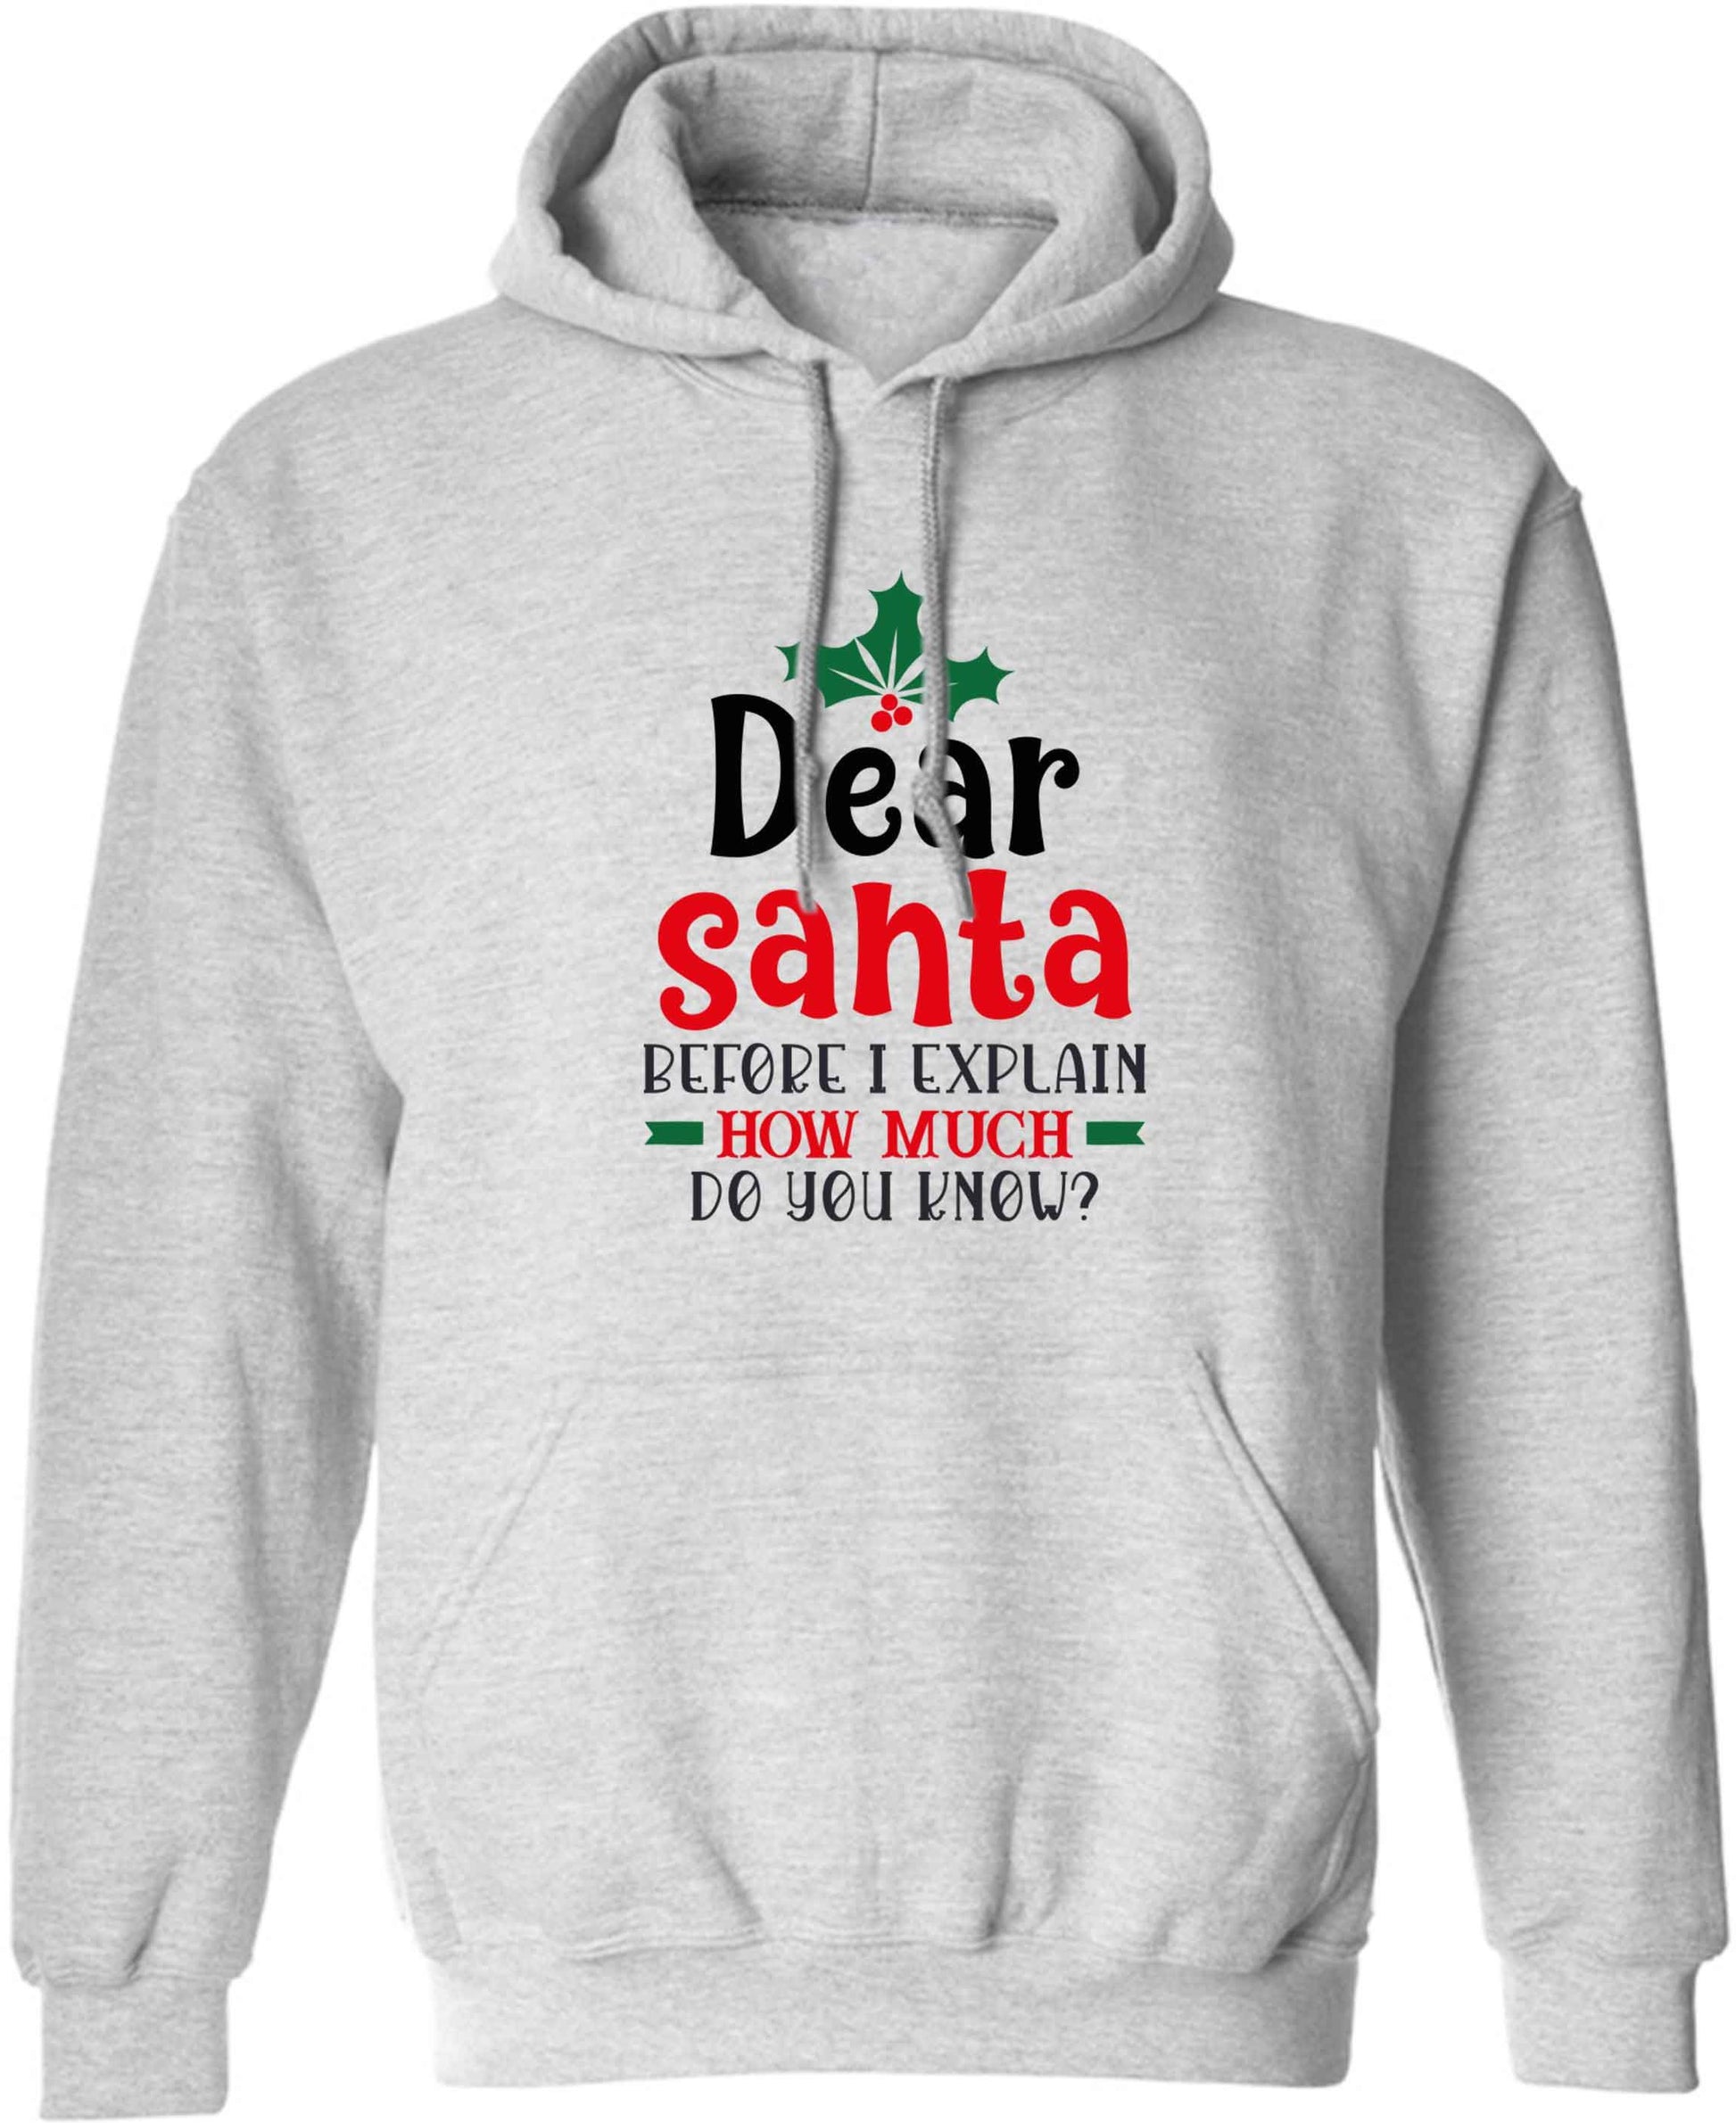 Santa before I explain how much do you know? adults unisex grey hoodie 2XL